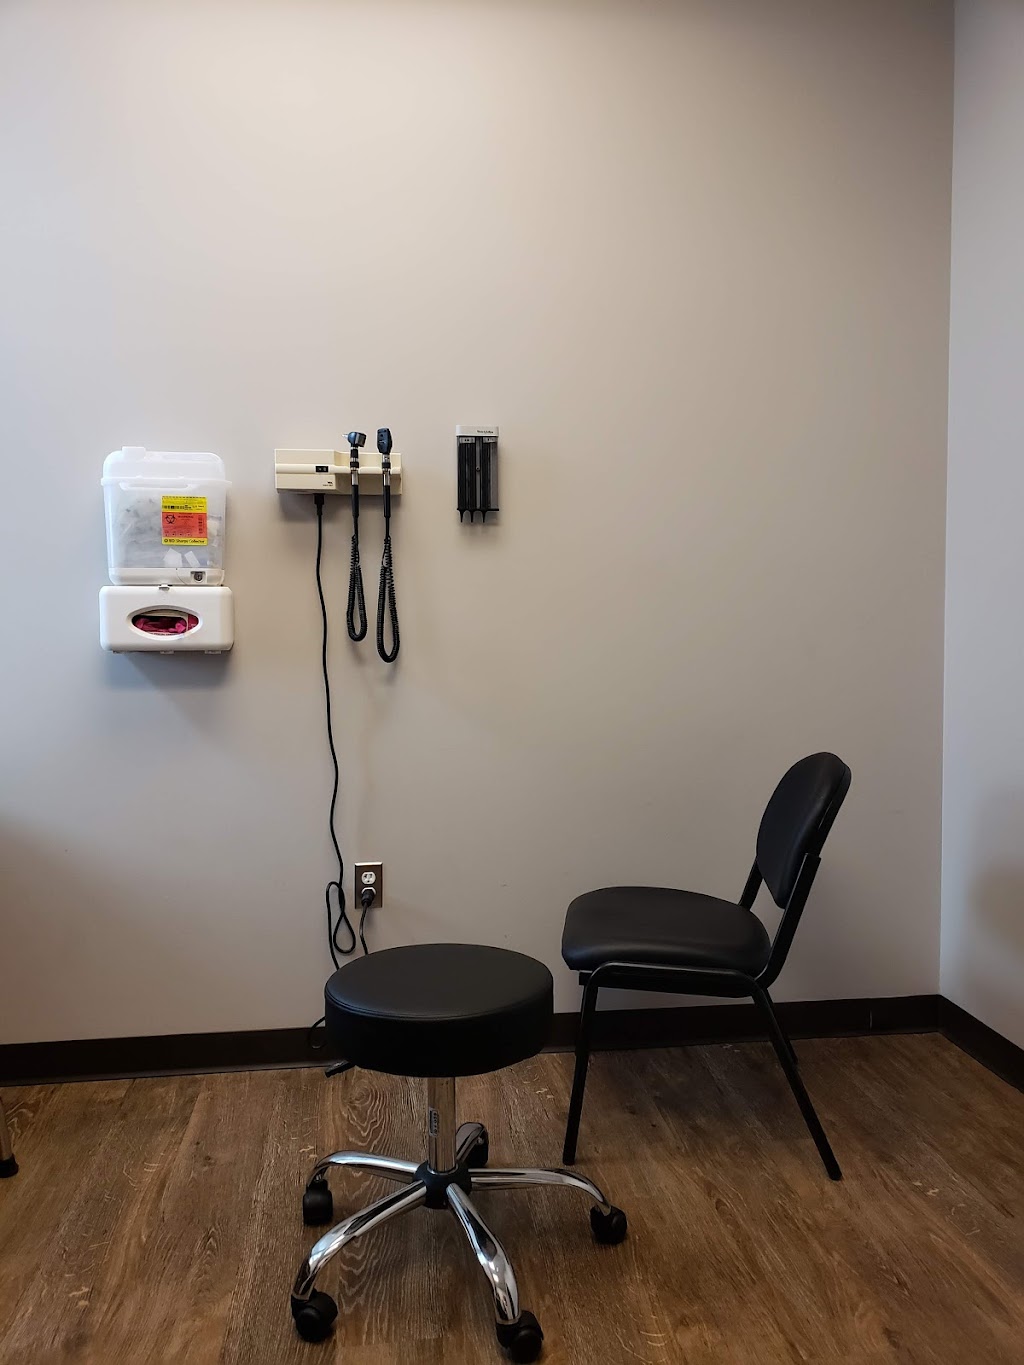 Springfield Urgent Care | 9749 Dixie Hwy suite b, City of the Village of Clarkston, MI 48348 | Phone: (248) 942-5888